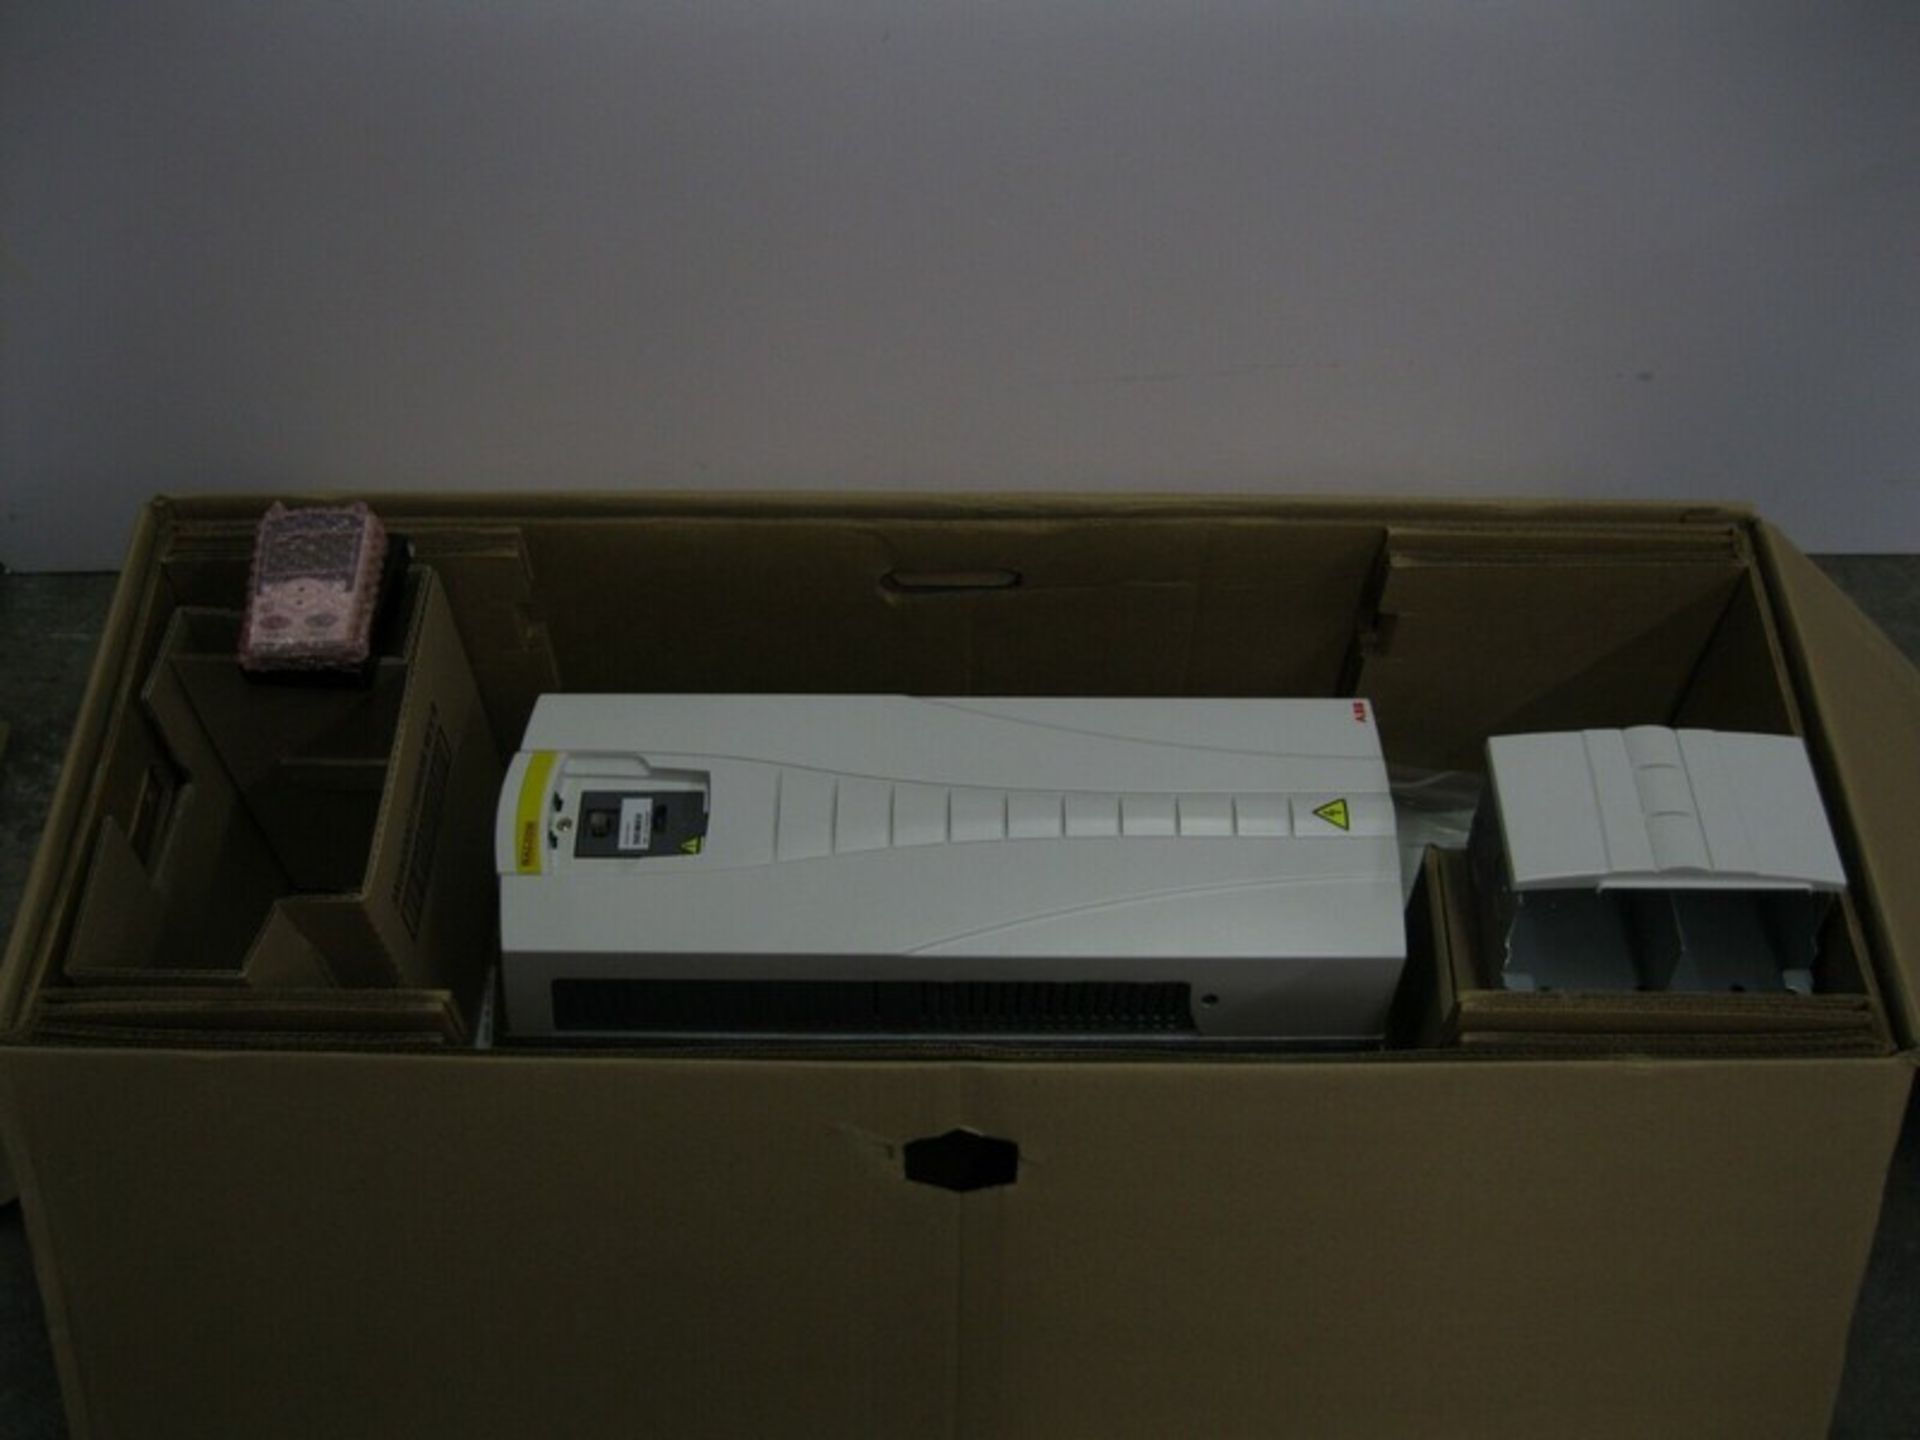 ABB Baldor ACB530-U1-059A-4 Variable Speed Drive 40 HP NEW (Loading Fee $50) (Located Springfield, - Image 7 of 7